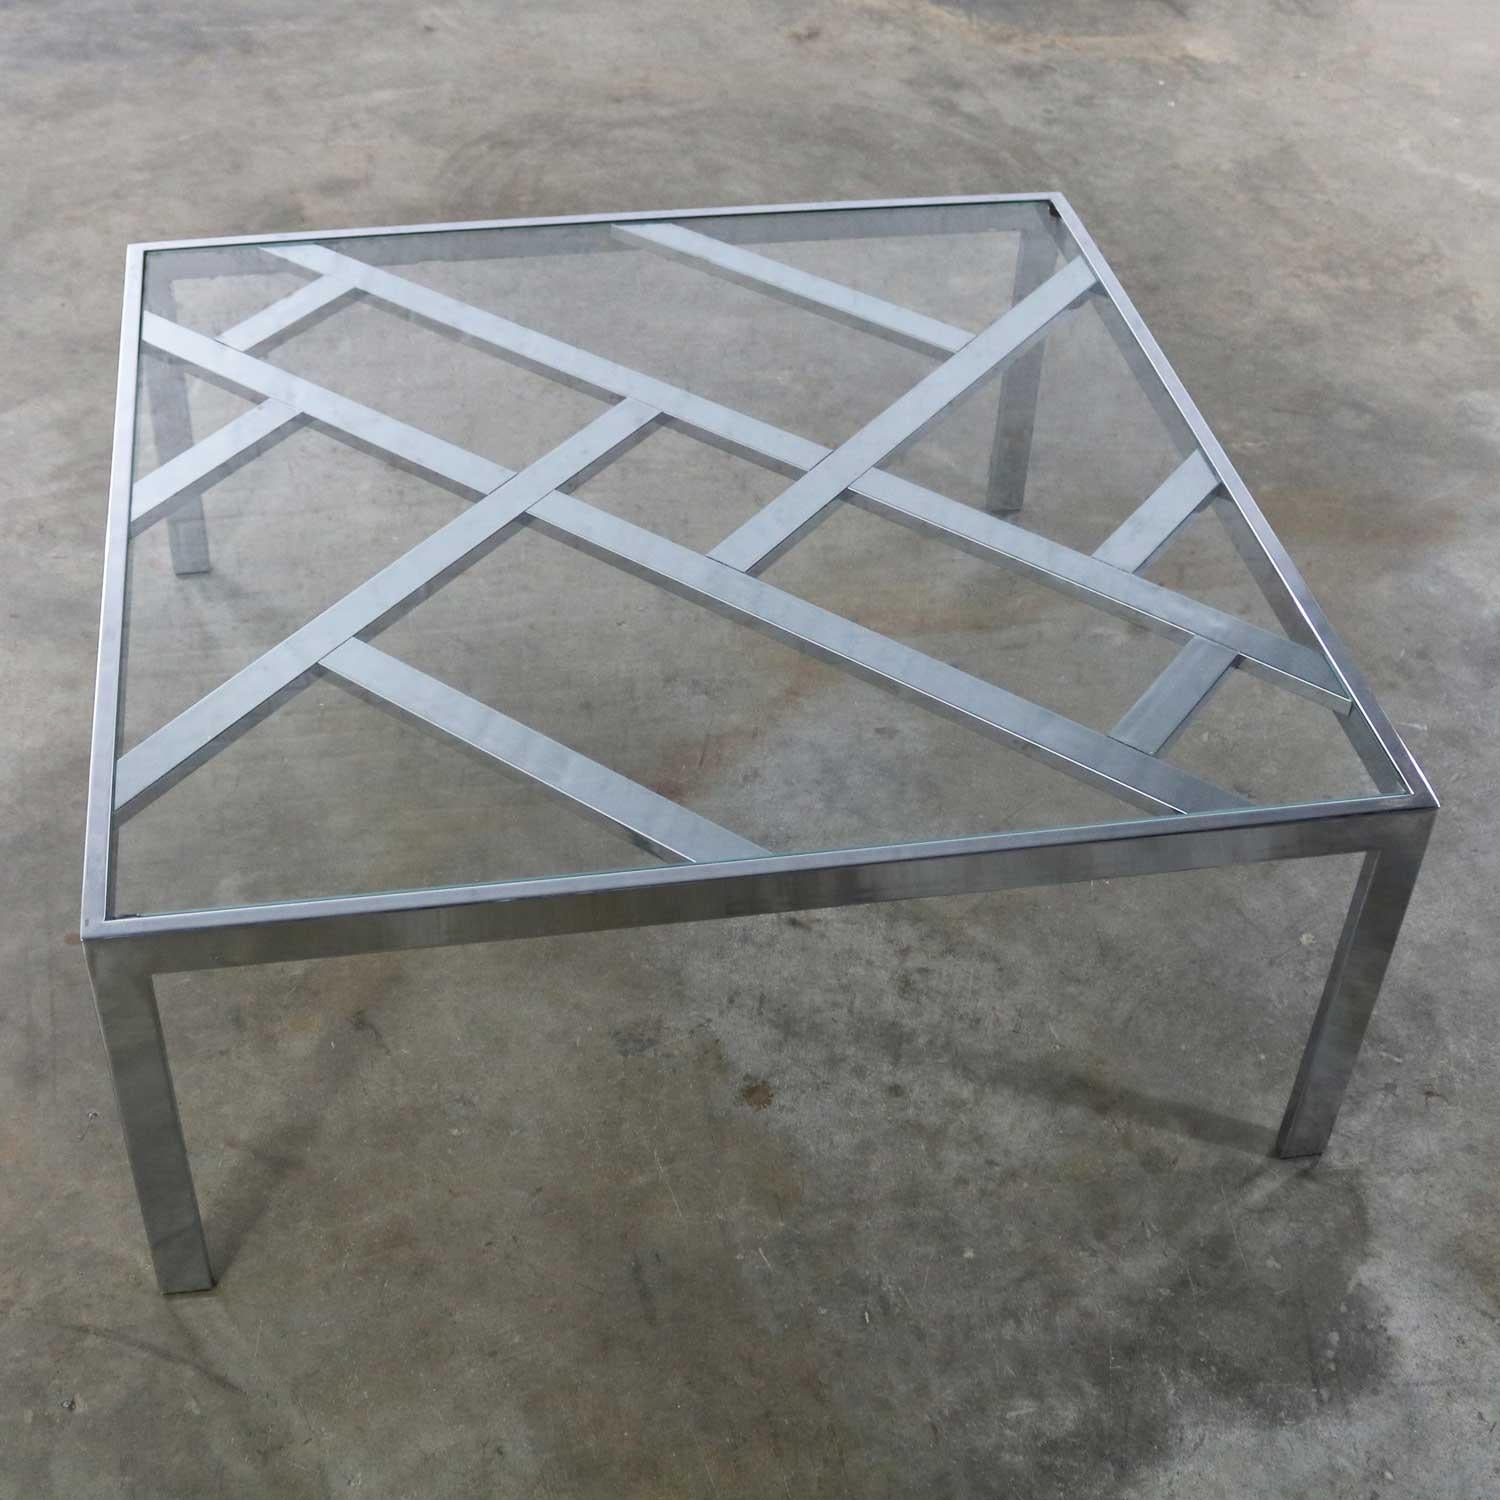 Handsome Hollywood Regency chrome square coffee table with glass insert top. This table has overtones of Milo Baughman mixed with Chinese Chippendale style lattice design. It is in wonderful vintage condition overall. The chrome has been polished